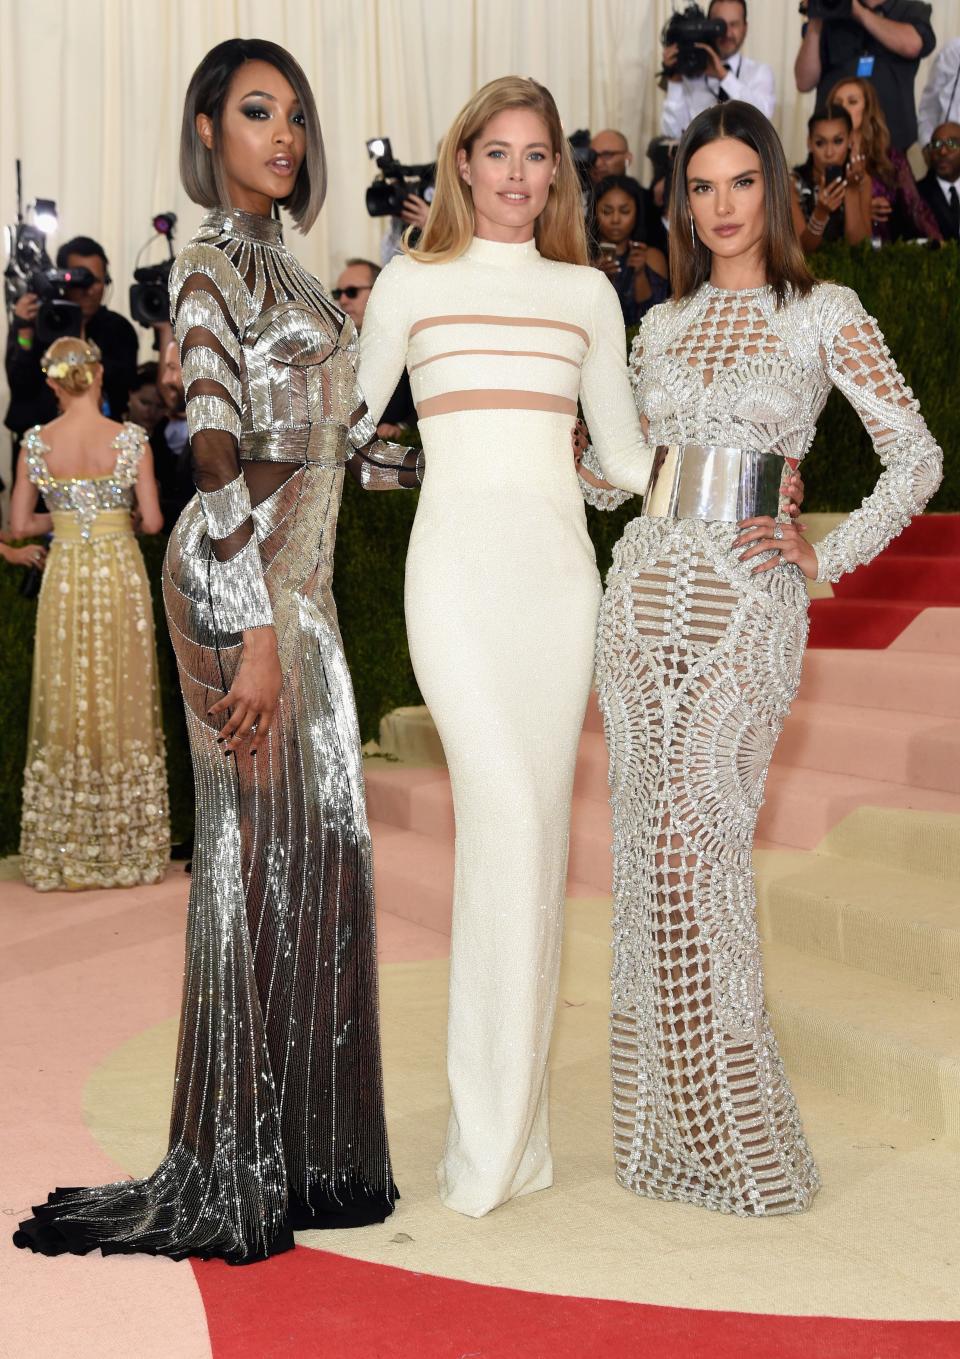 <h1 class="title">Jourdan Dunn in a Balmain dress and Eva Fehren jewelry, Doutzen Kroes in Balmain, and Alessandra Ambrosio in a Balmain dress, Jennifer Fisher earrings, and Fred Leighton rings</h1><cite class="credit">Photo: Getty Images</cite>